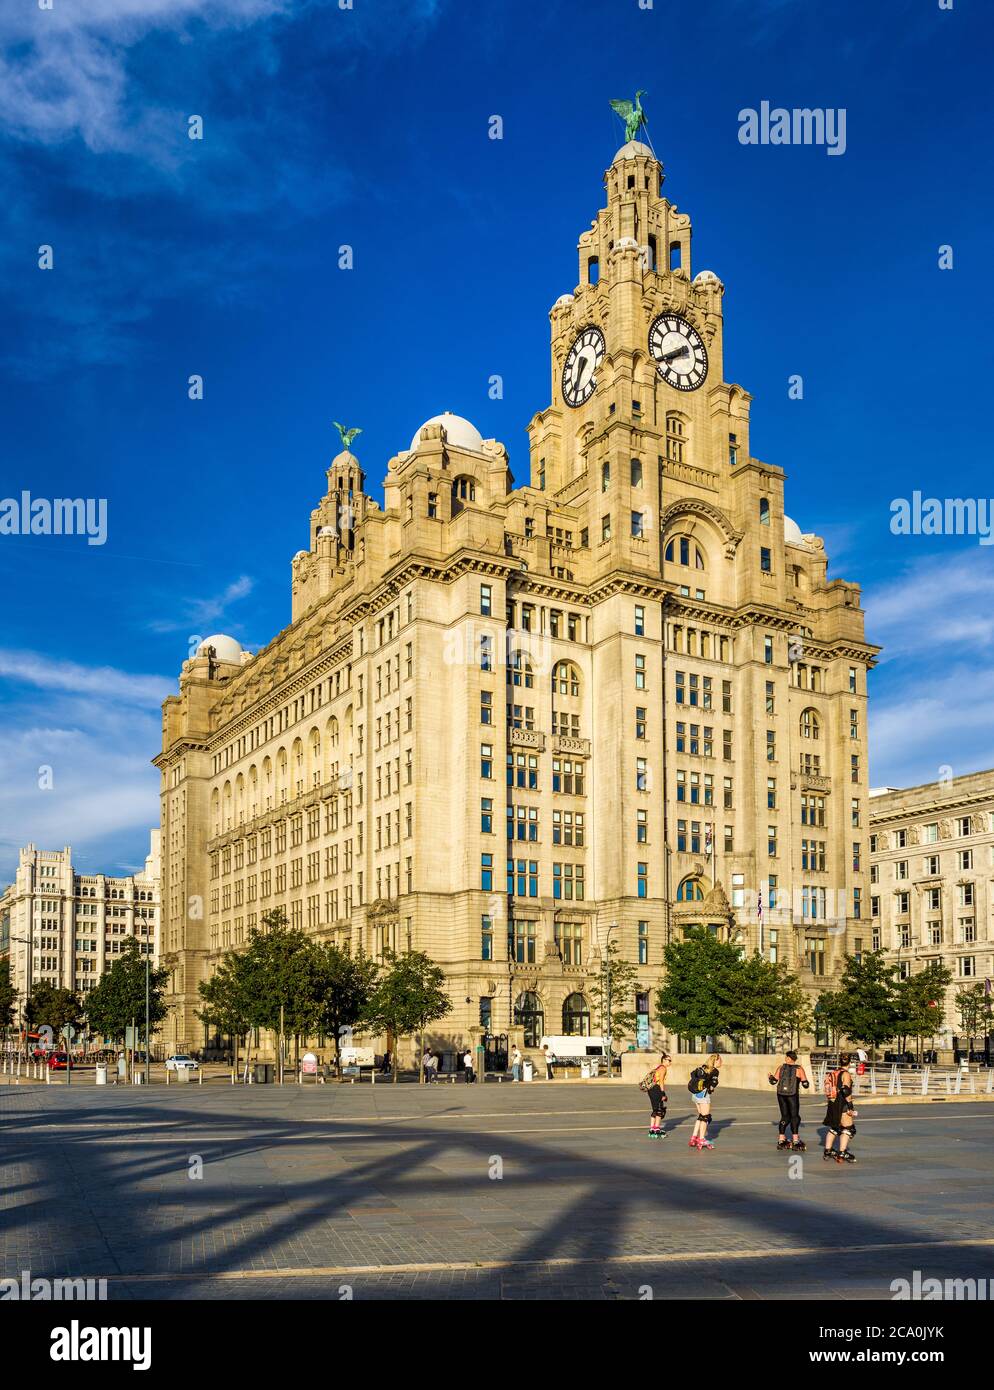 Royal Liver Building Liverpool. Built between 1908-1911 as home of the Royal Liver Assurance group. One of the Liverpool Three Graces Buildings. Stock Photo